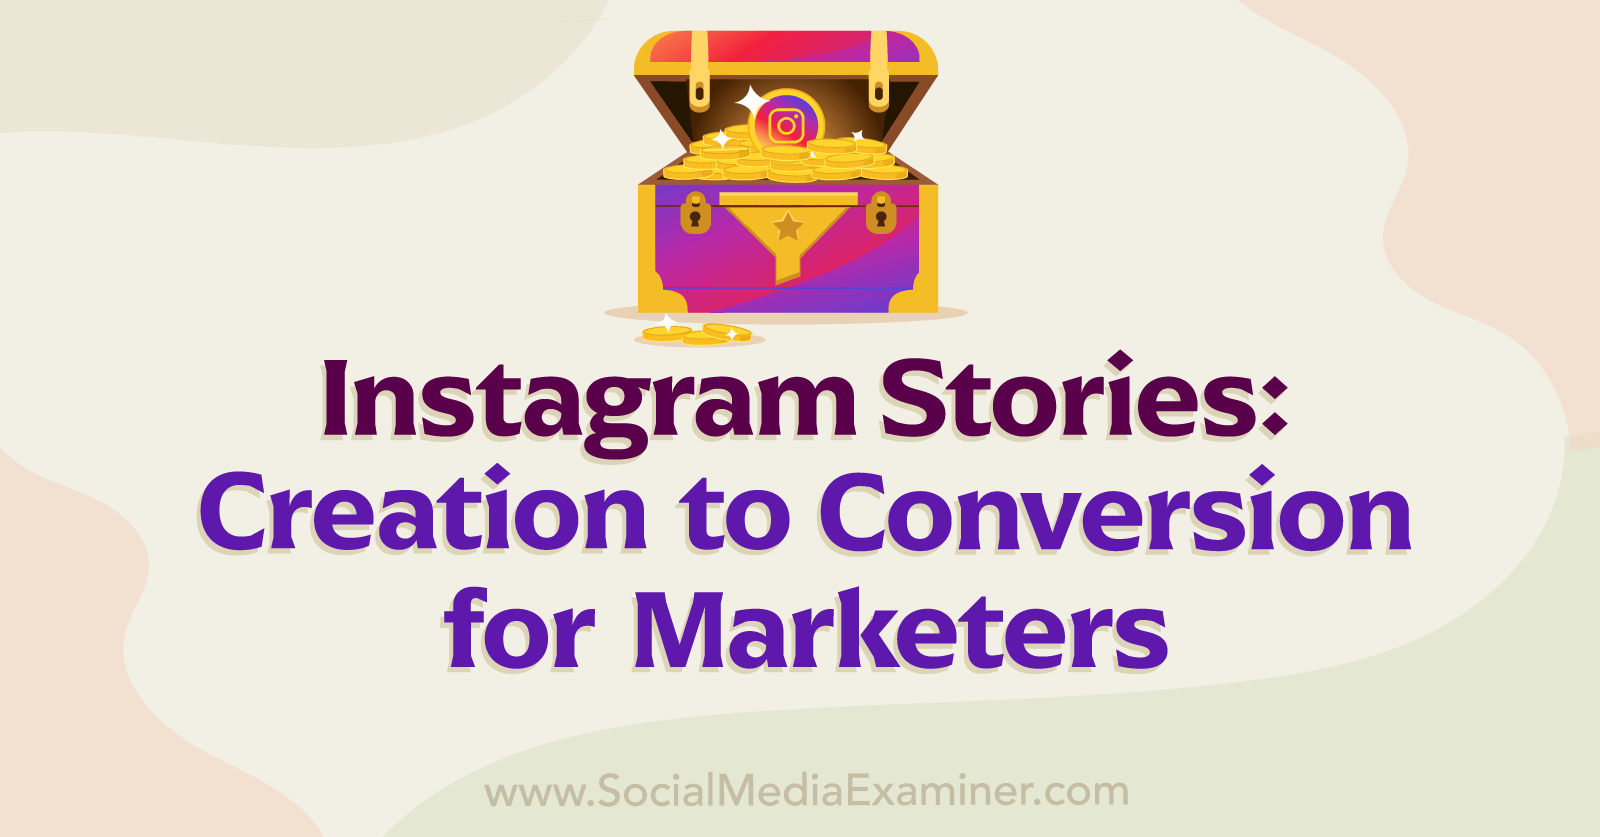 Instagram Stories: Creation to Conversion for Marketers by Social Media Examiner